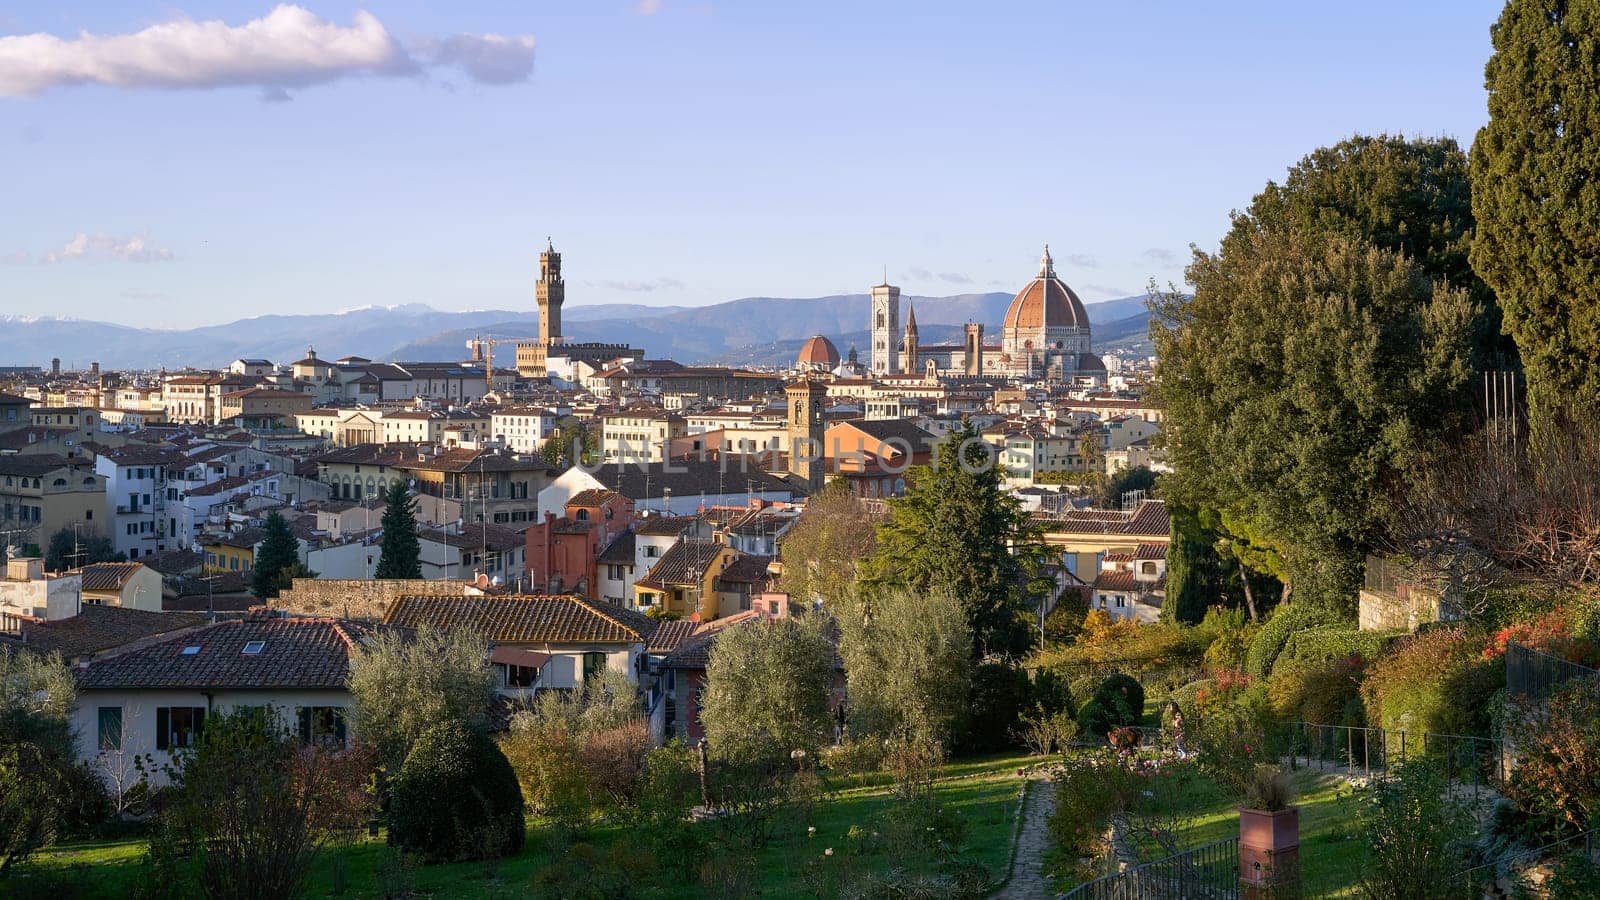 View of the old city of Florence, Italy from the hill